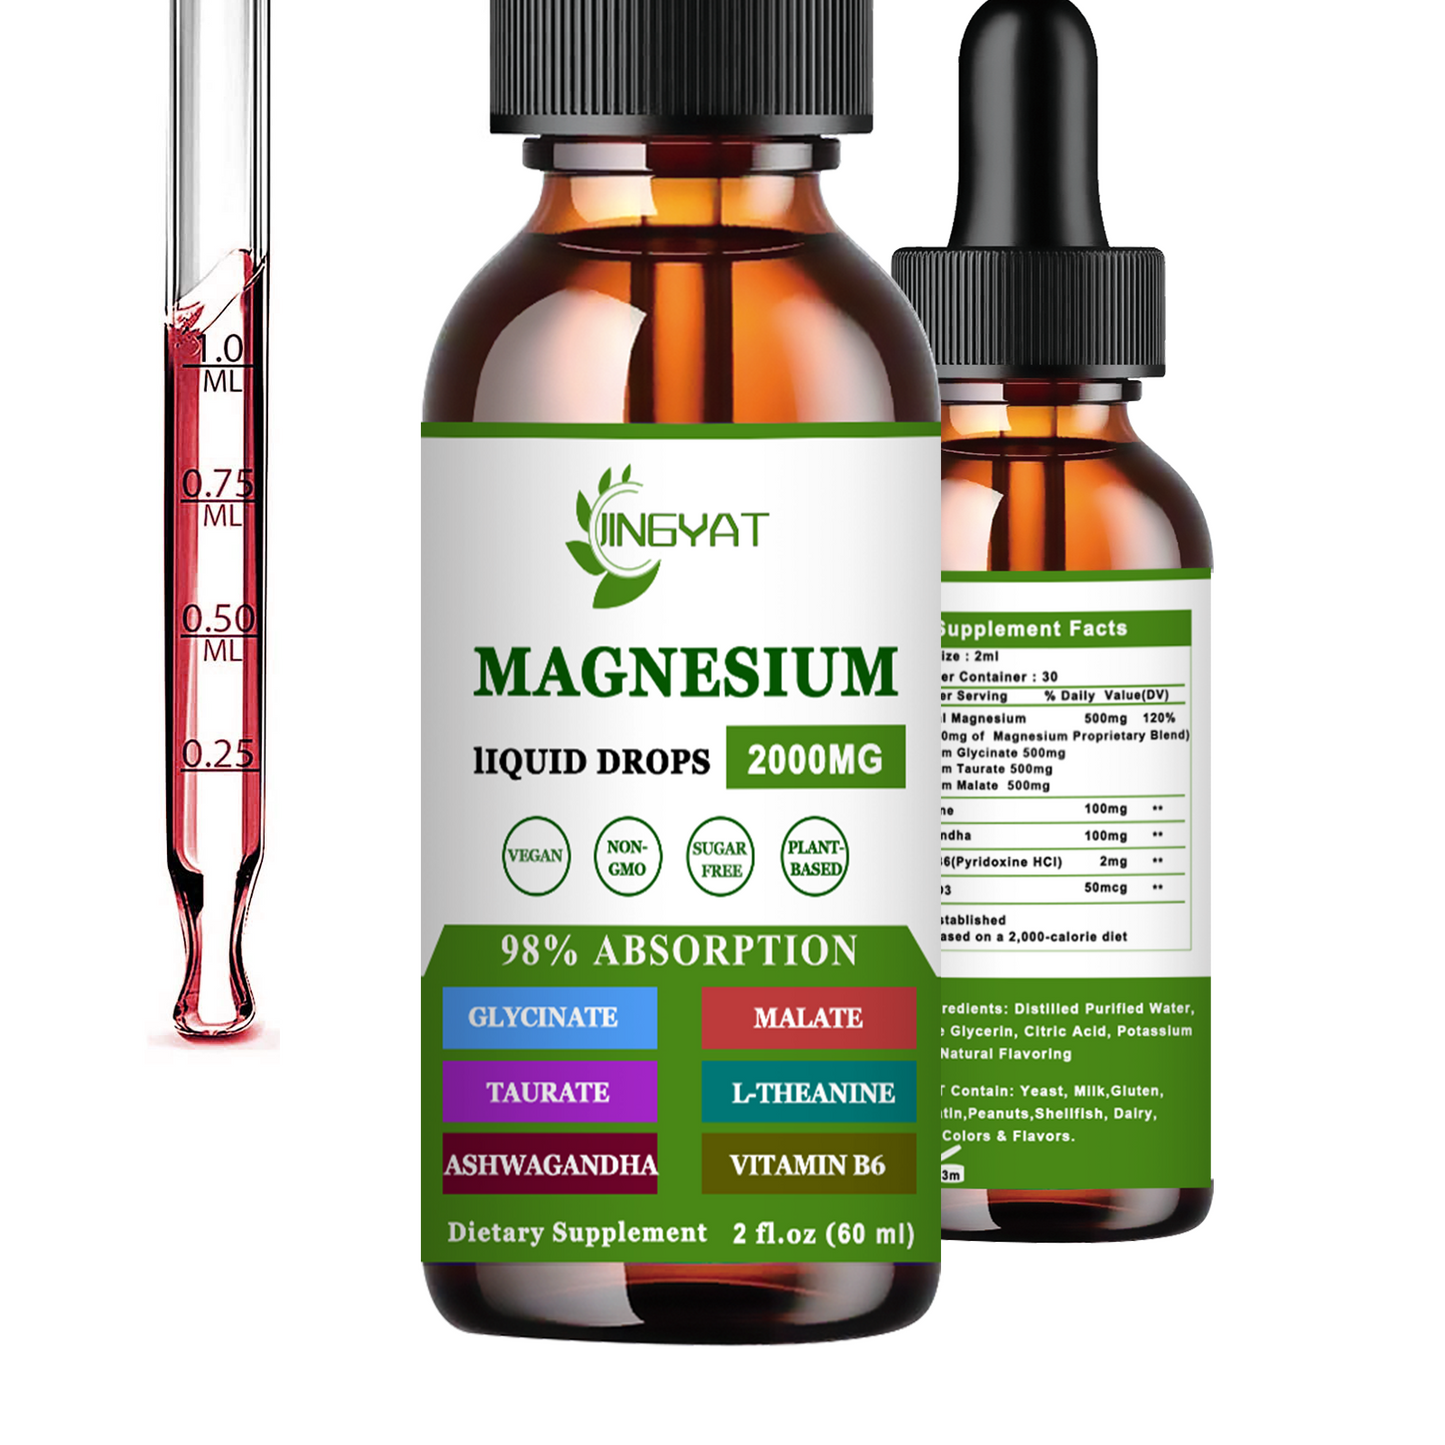 Triple Magnesium Complex | Magnesium Glycinate, Malate & Taurate | Highly Absorption Chelated Form | Magnesium Glycinate Liquid w/L-Theanine, Ashwagandha for Bone, Heart, Muscle Health